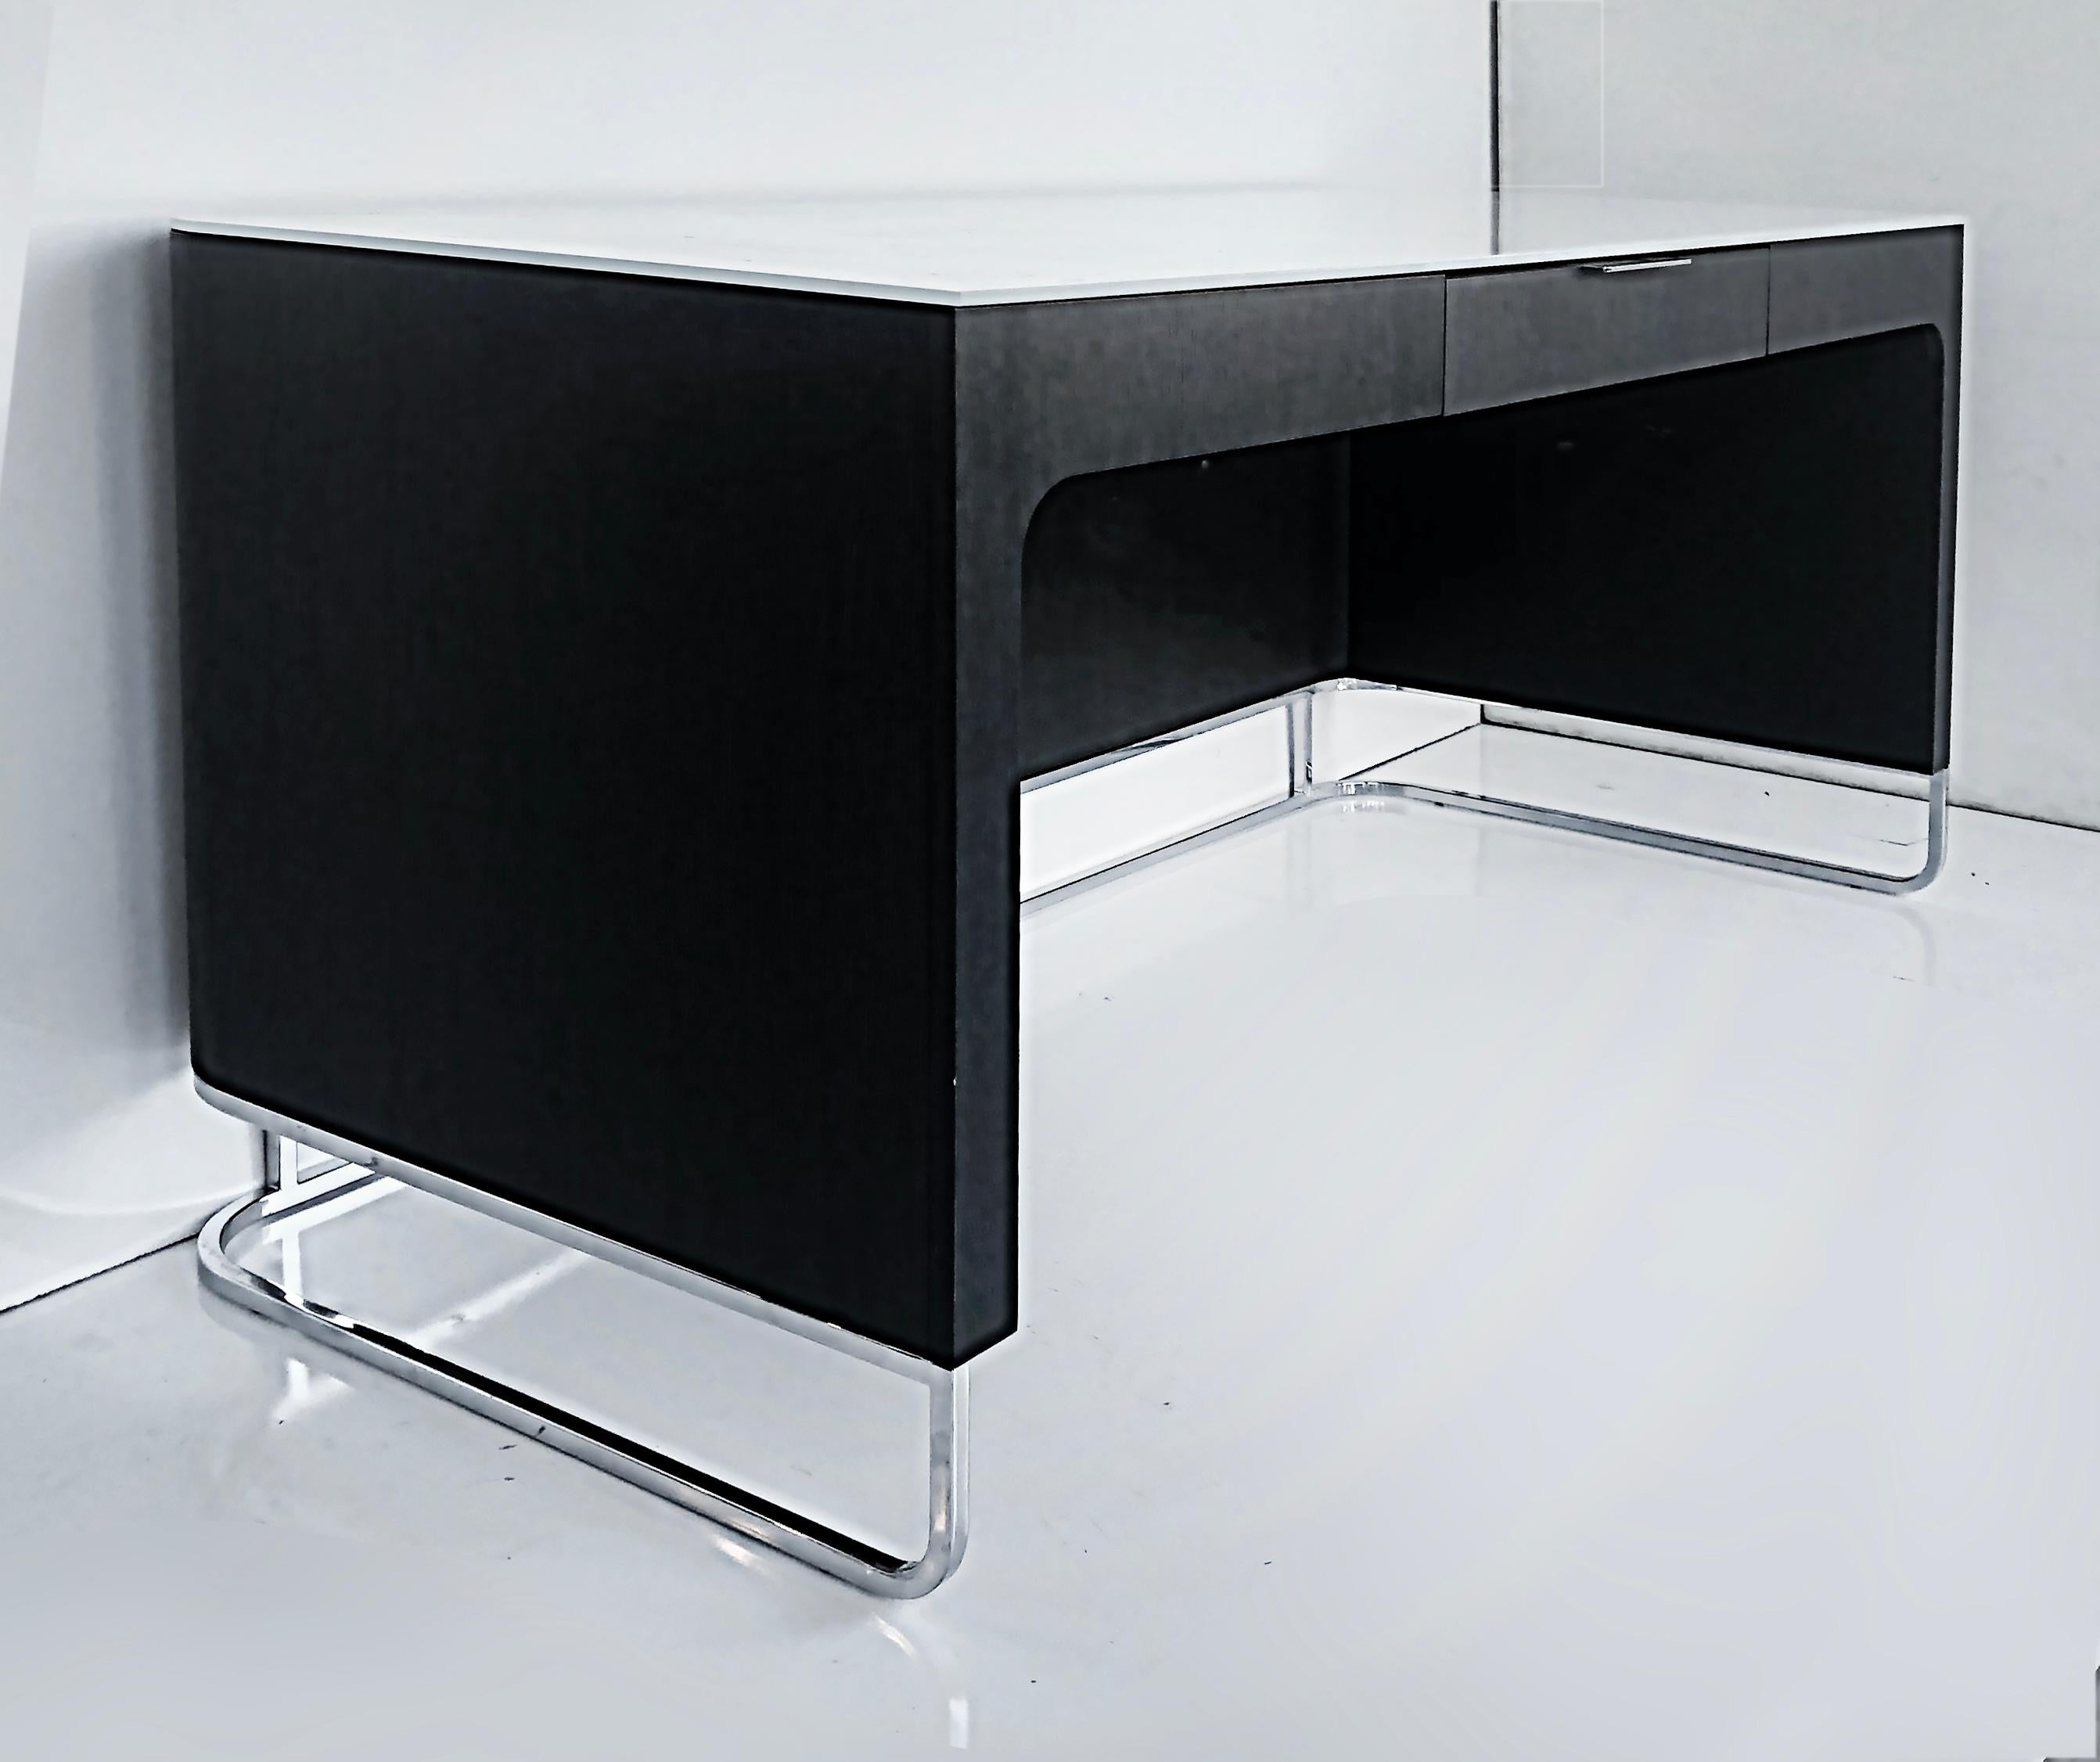 Ebonized Contemporary desk in wood, chrome, glass top, 21st-century.

Offered for sale is a contemporary ebonized wood and chrome desk with a white glass top. The desk has a floating feel and has one metal central drawer. The chrome base frame